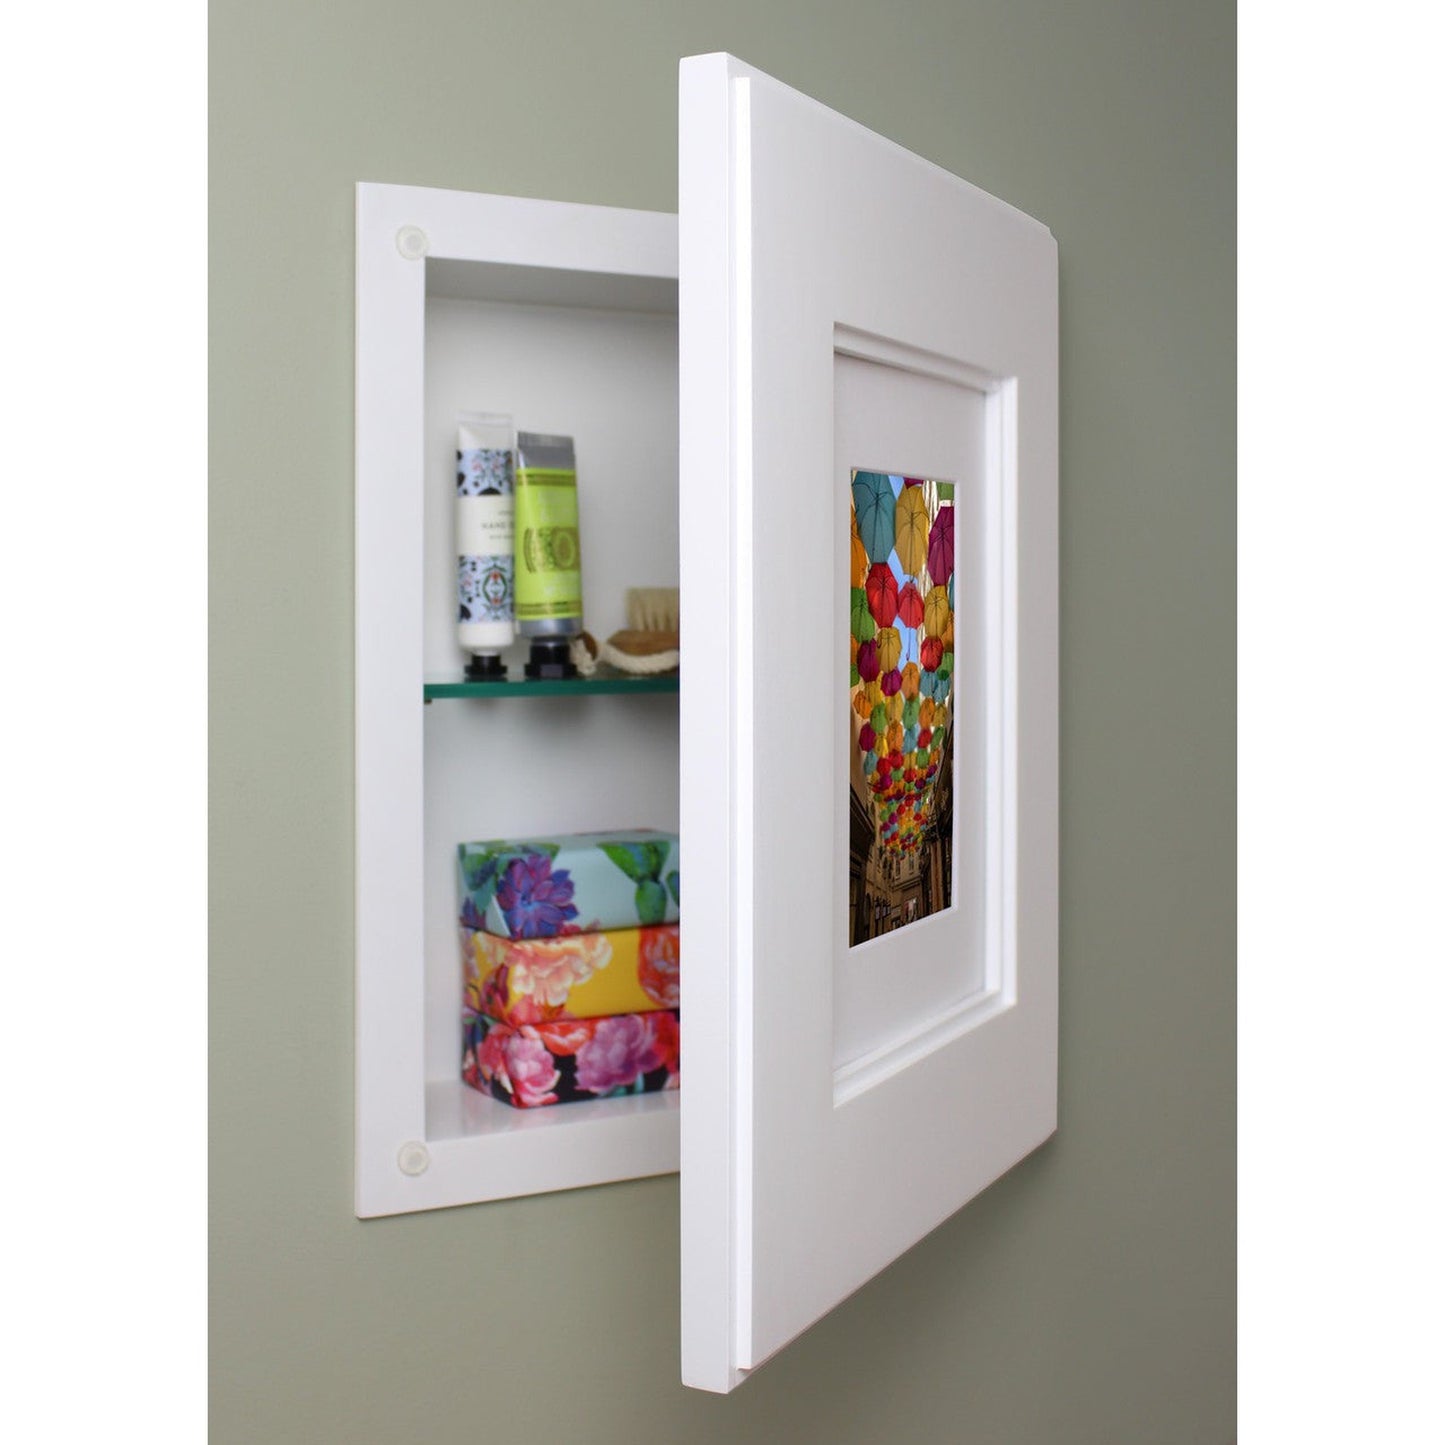 Fox Hollow Furnishings 11" x 14" White Compact Portrait Shaker Special 3" Depth Recessed Picture Frame Medicine Cabinet With White Matting